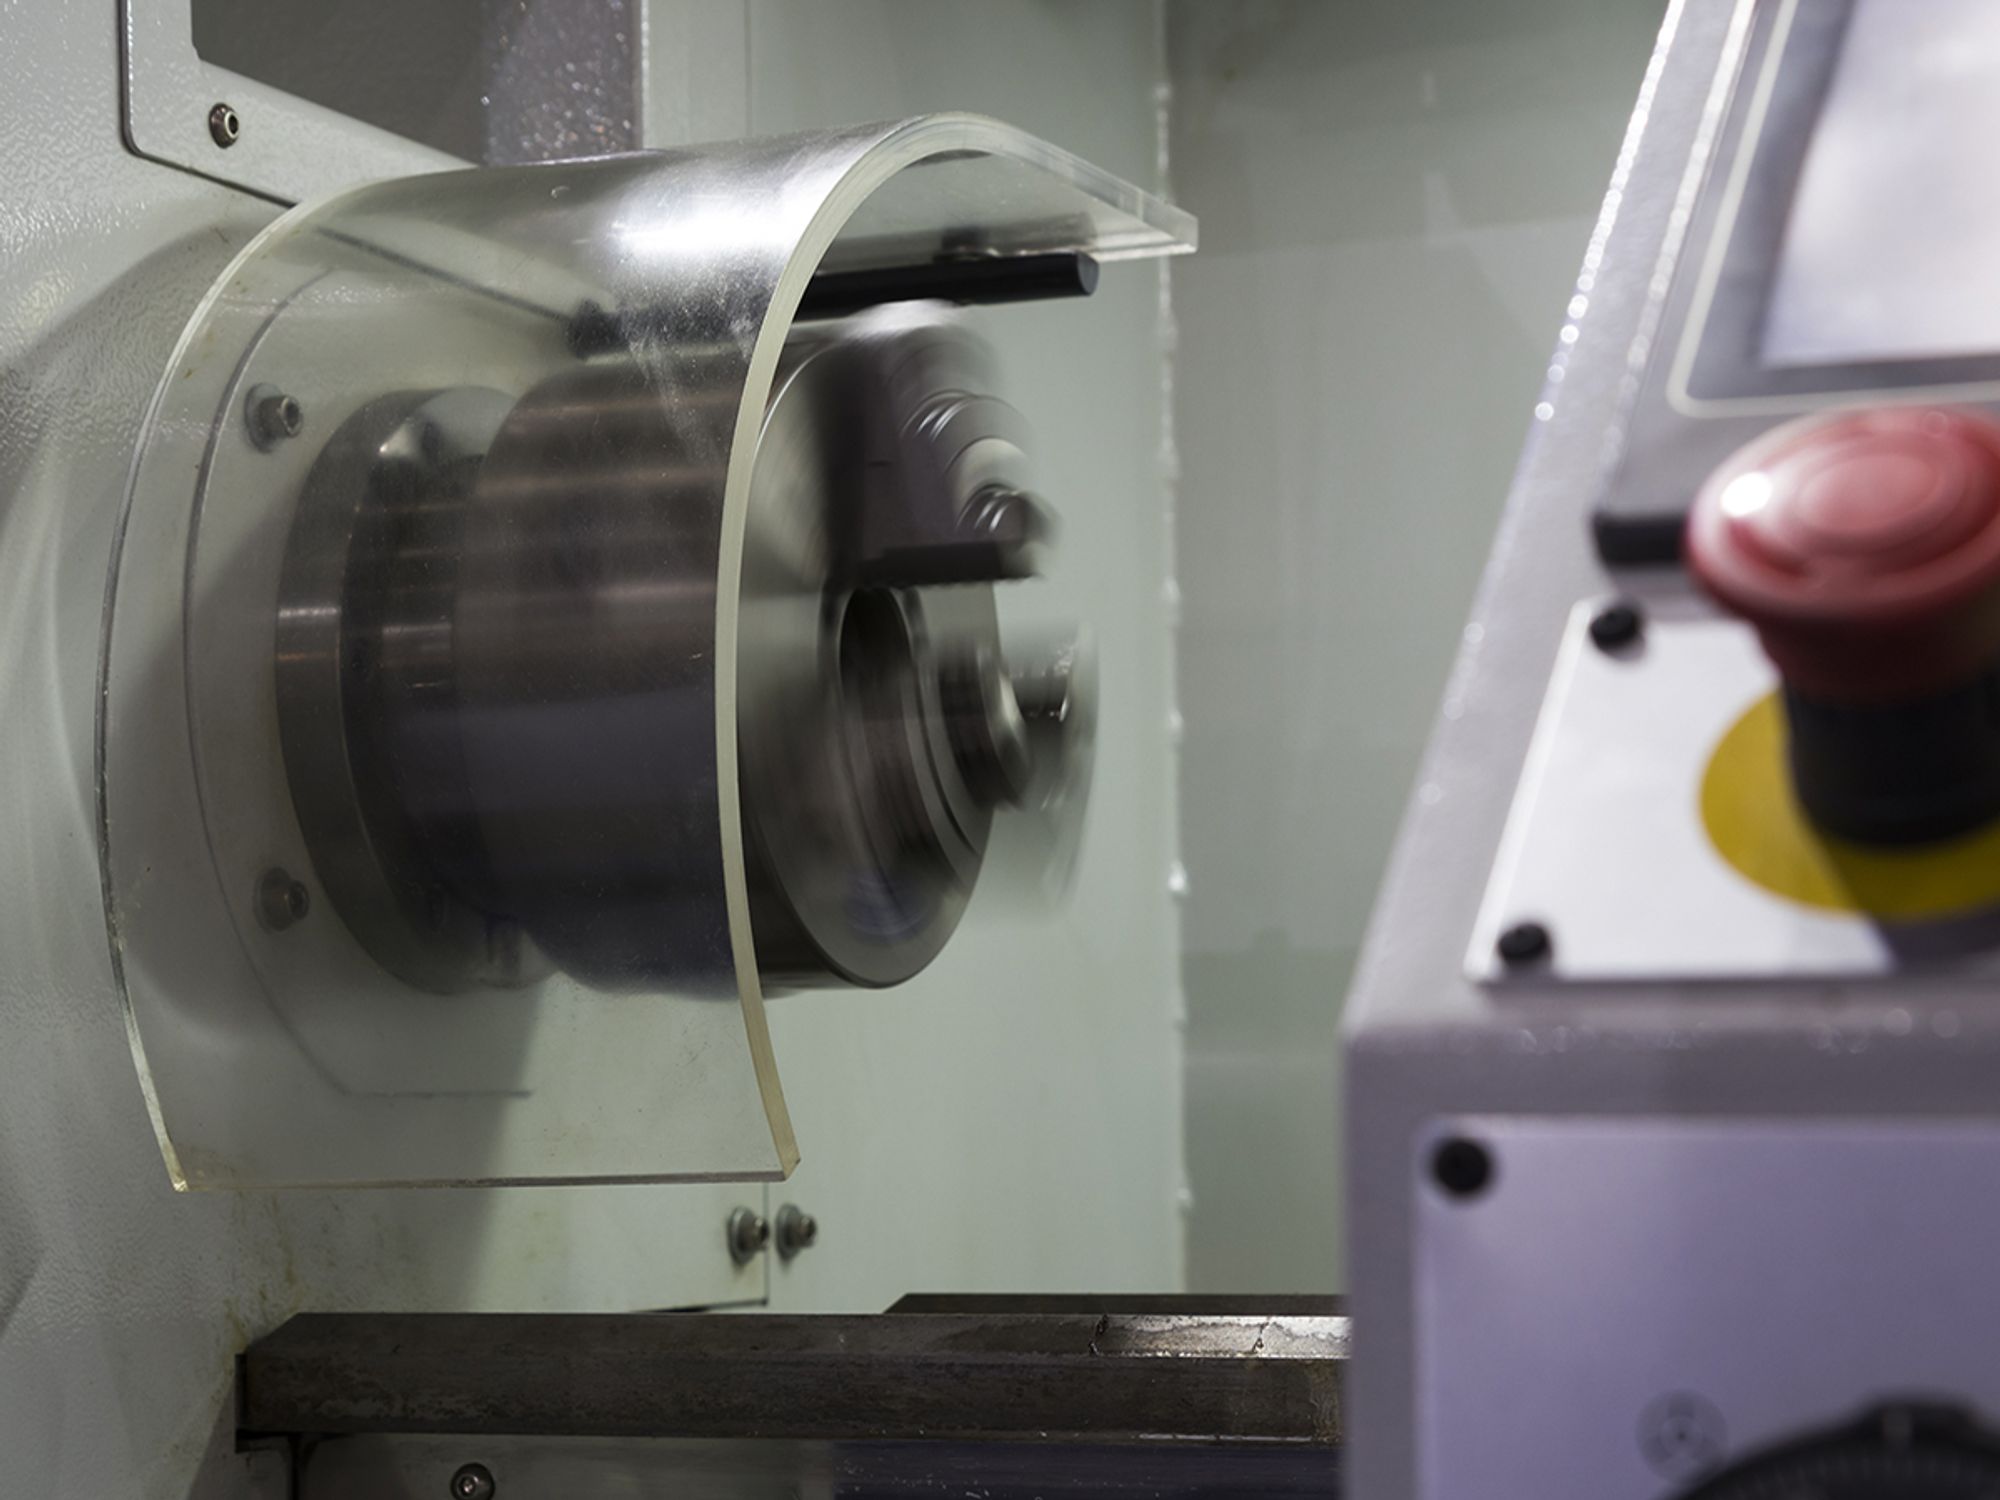 What are some secondary safeguarding methods for mechanical power presses?